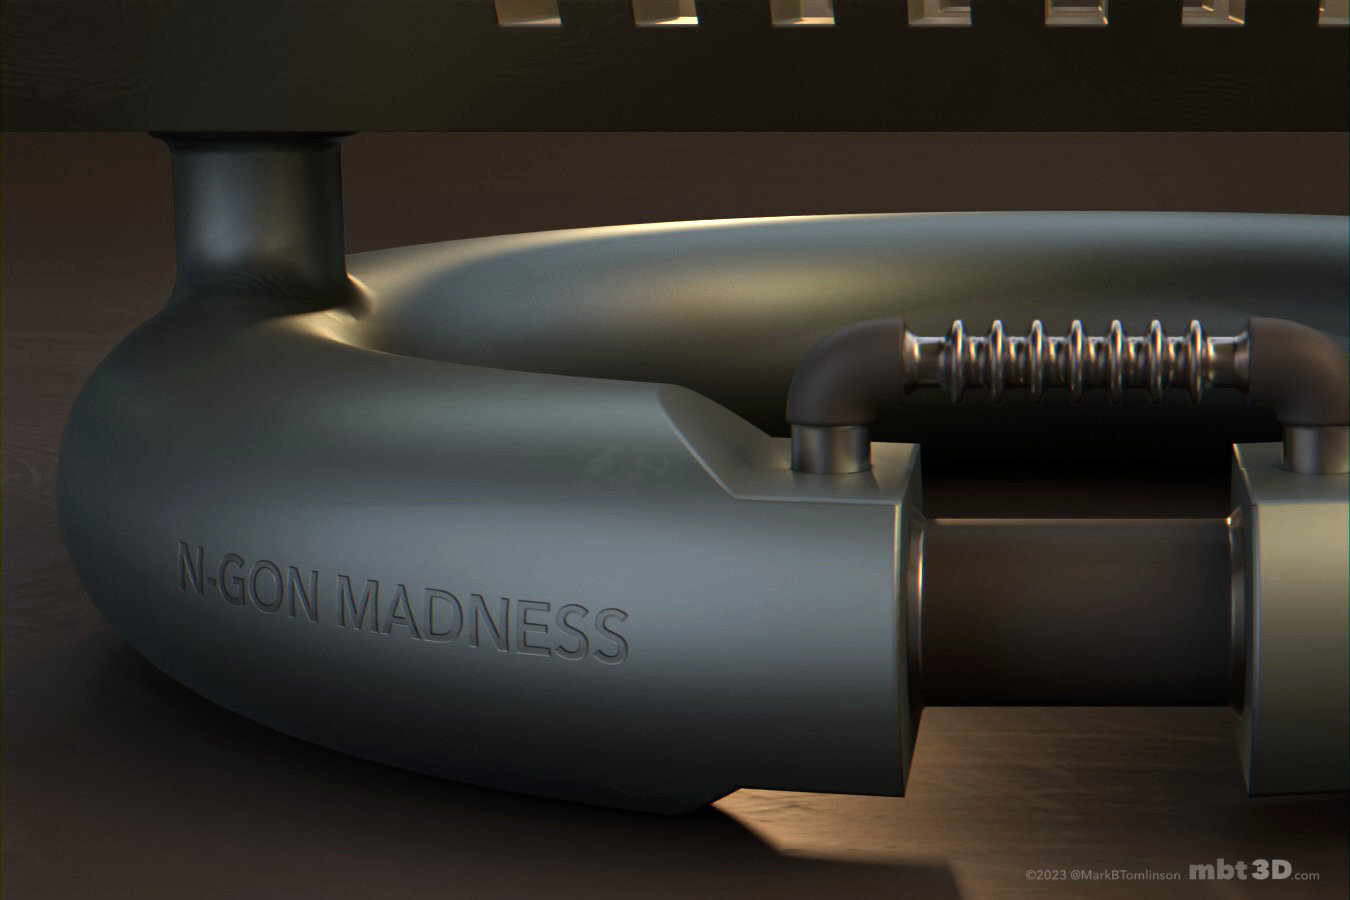 N-Gon madness: